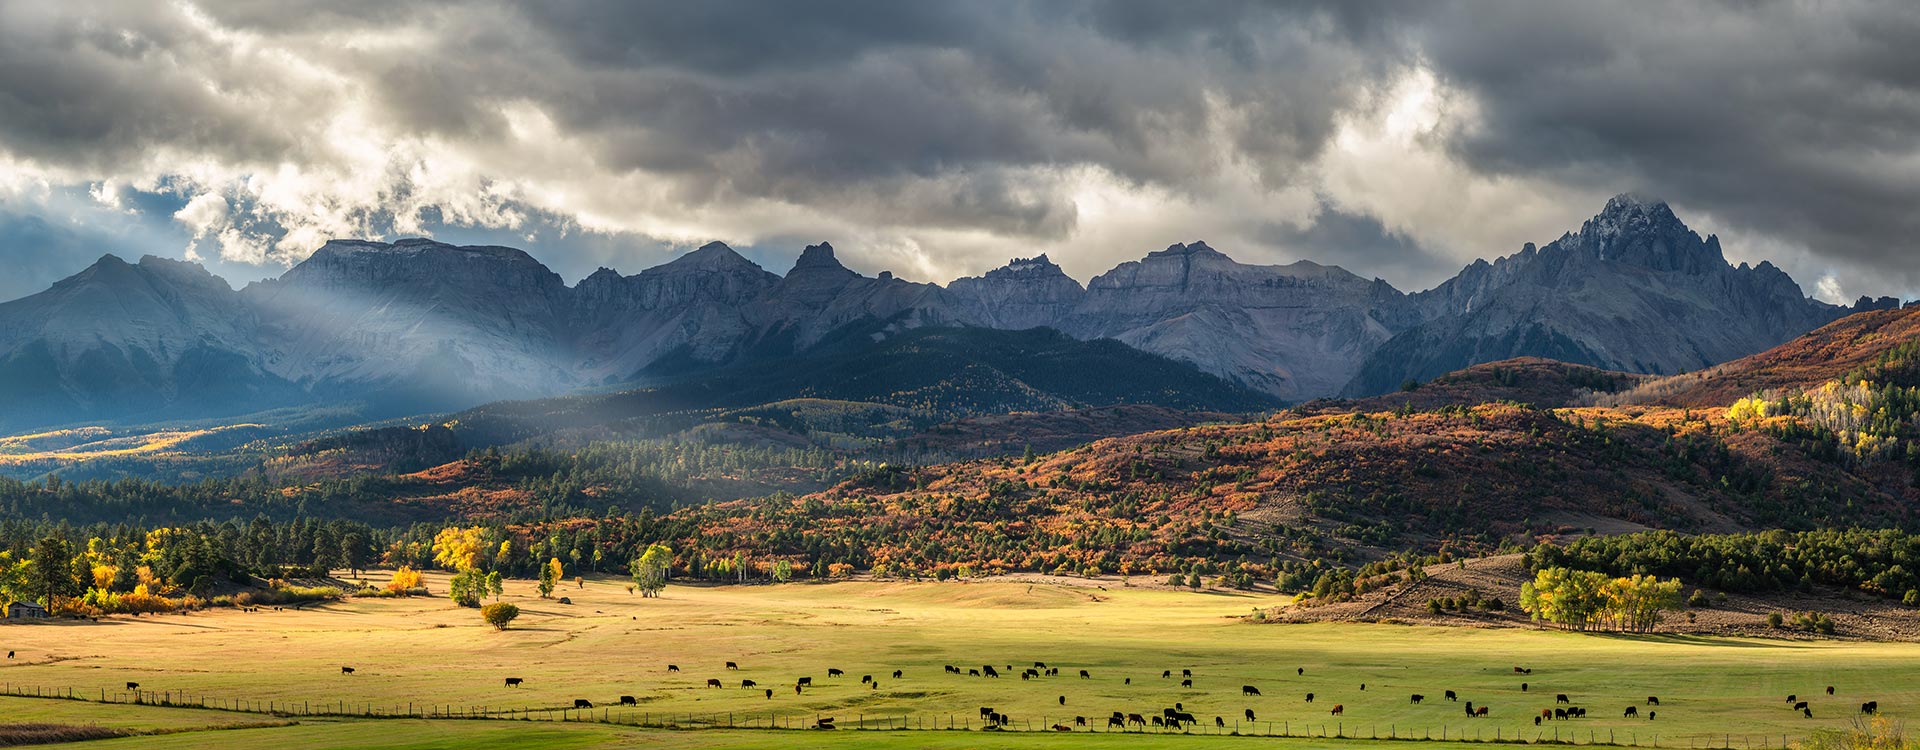 Large open range with cows and beautiful mountains in the distance